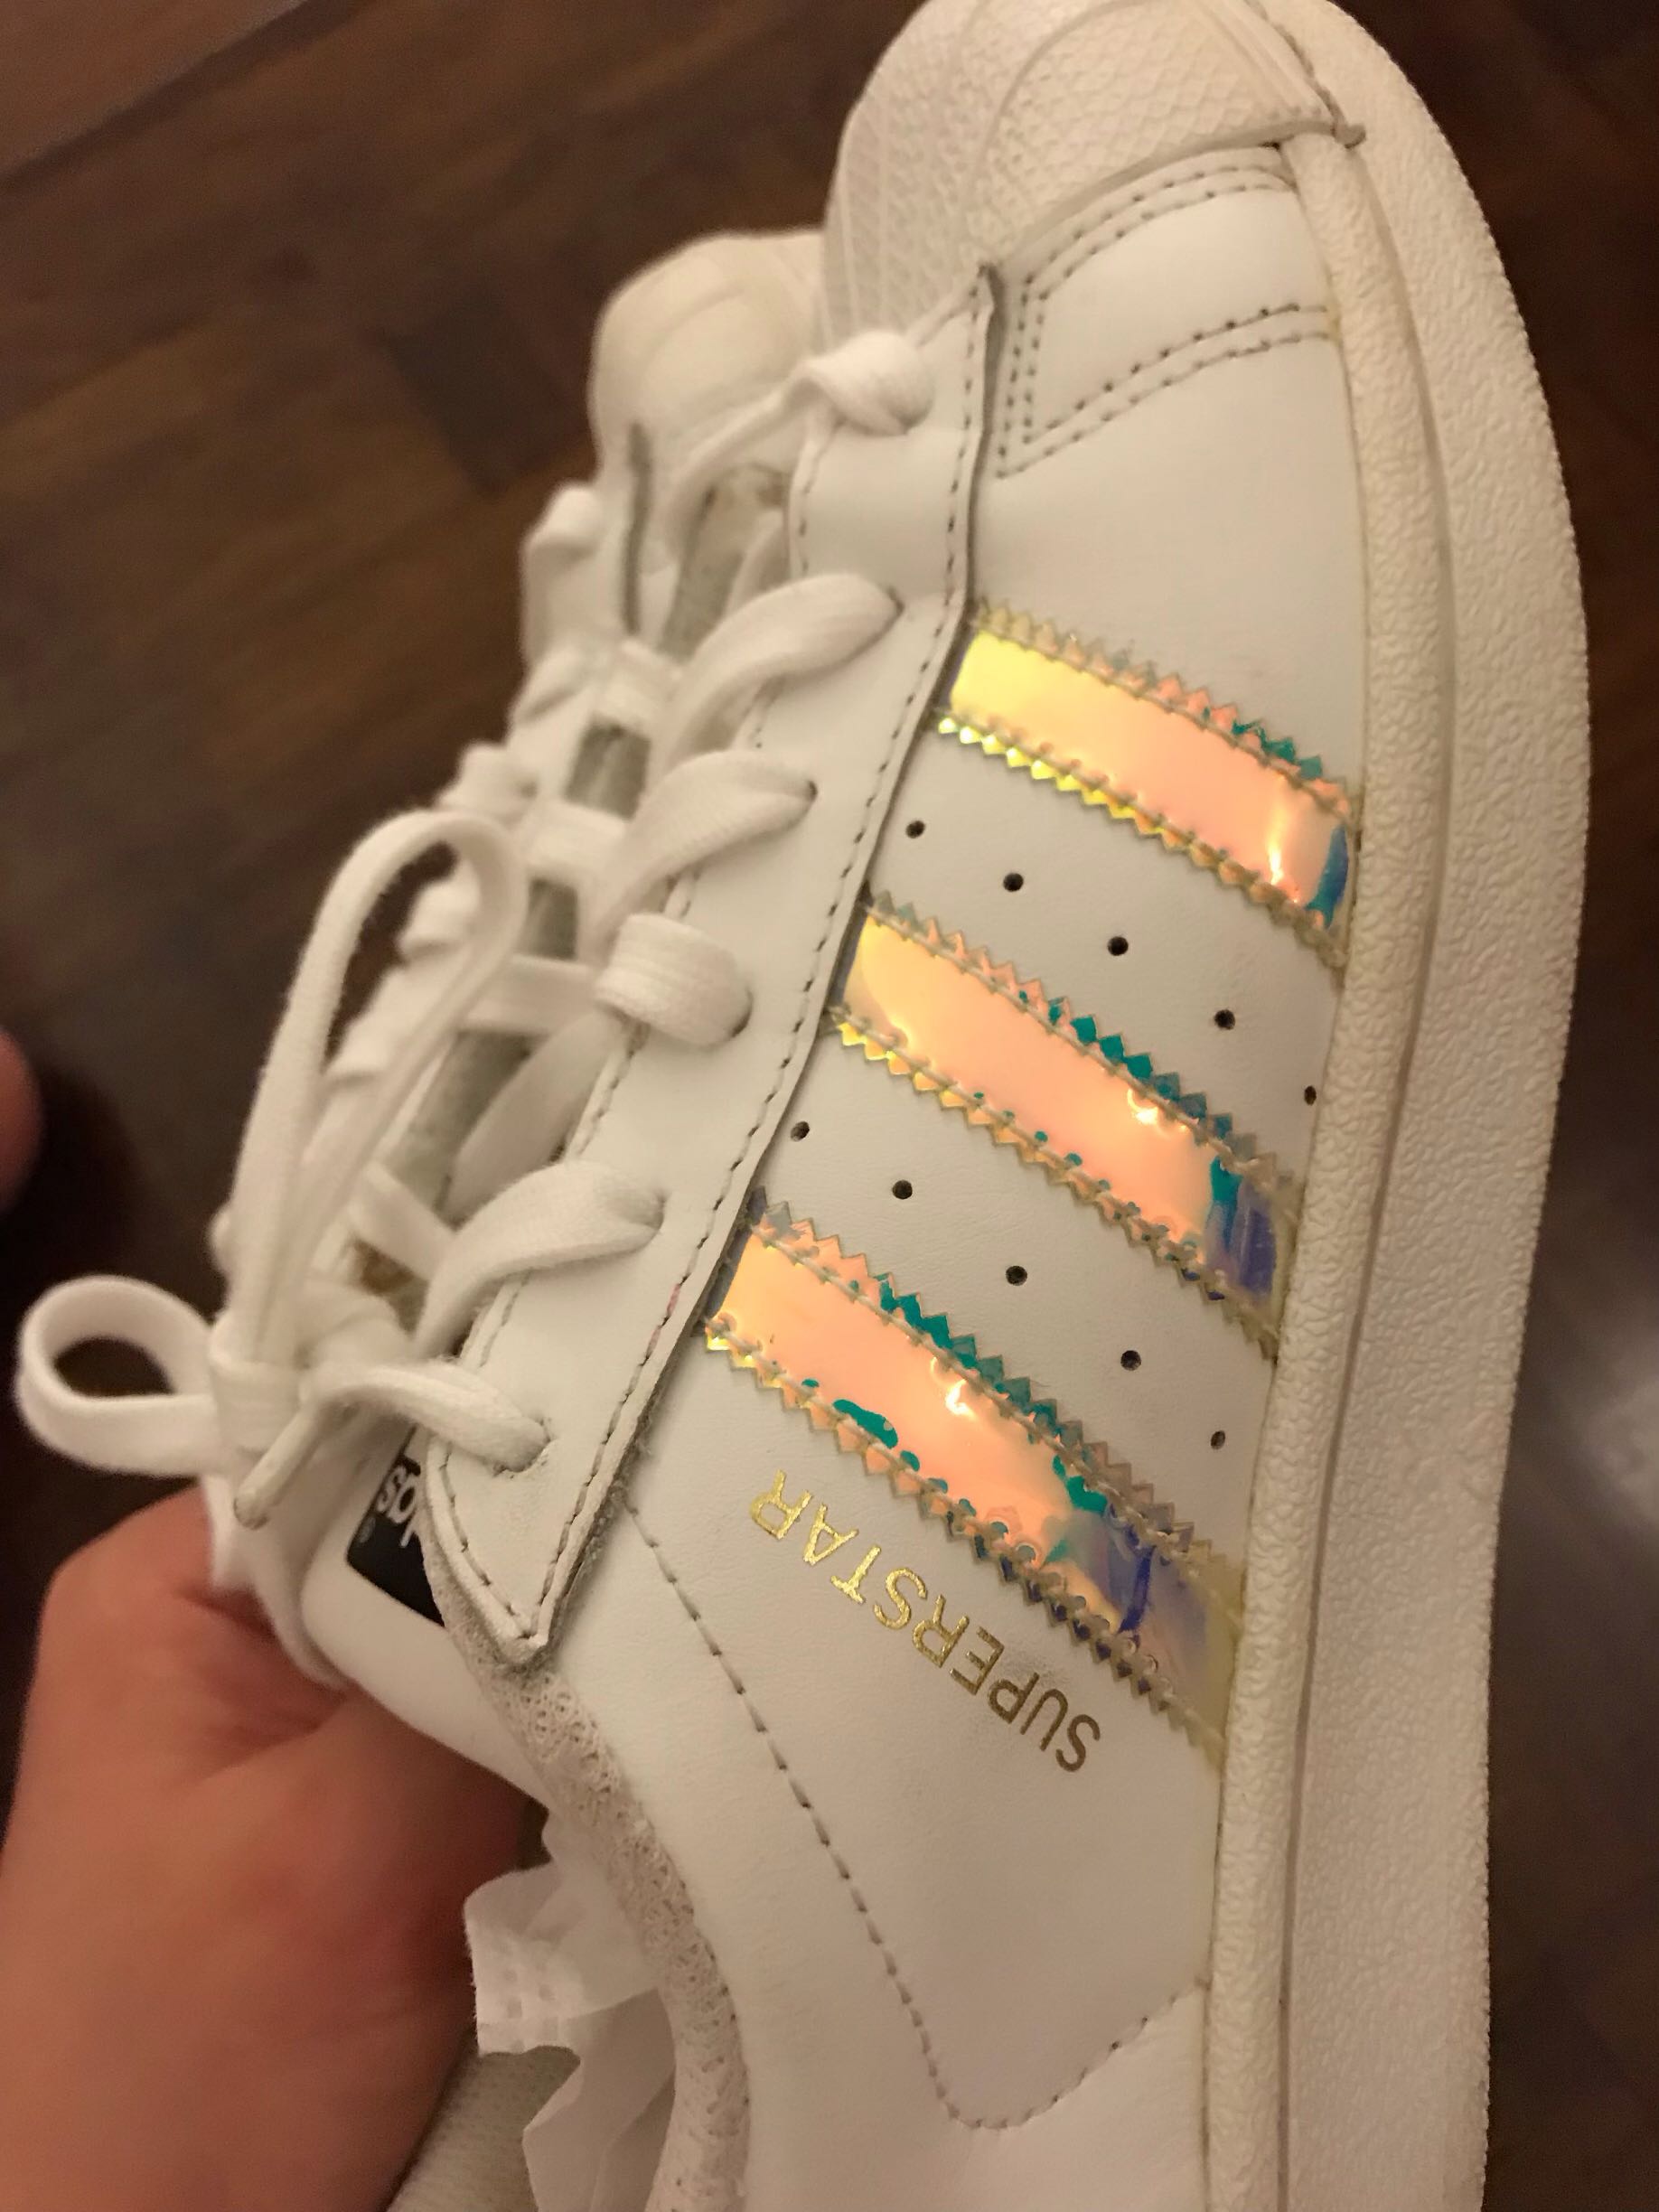 adidas shoes with holographic stripes